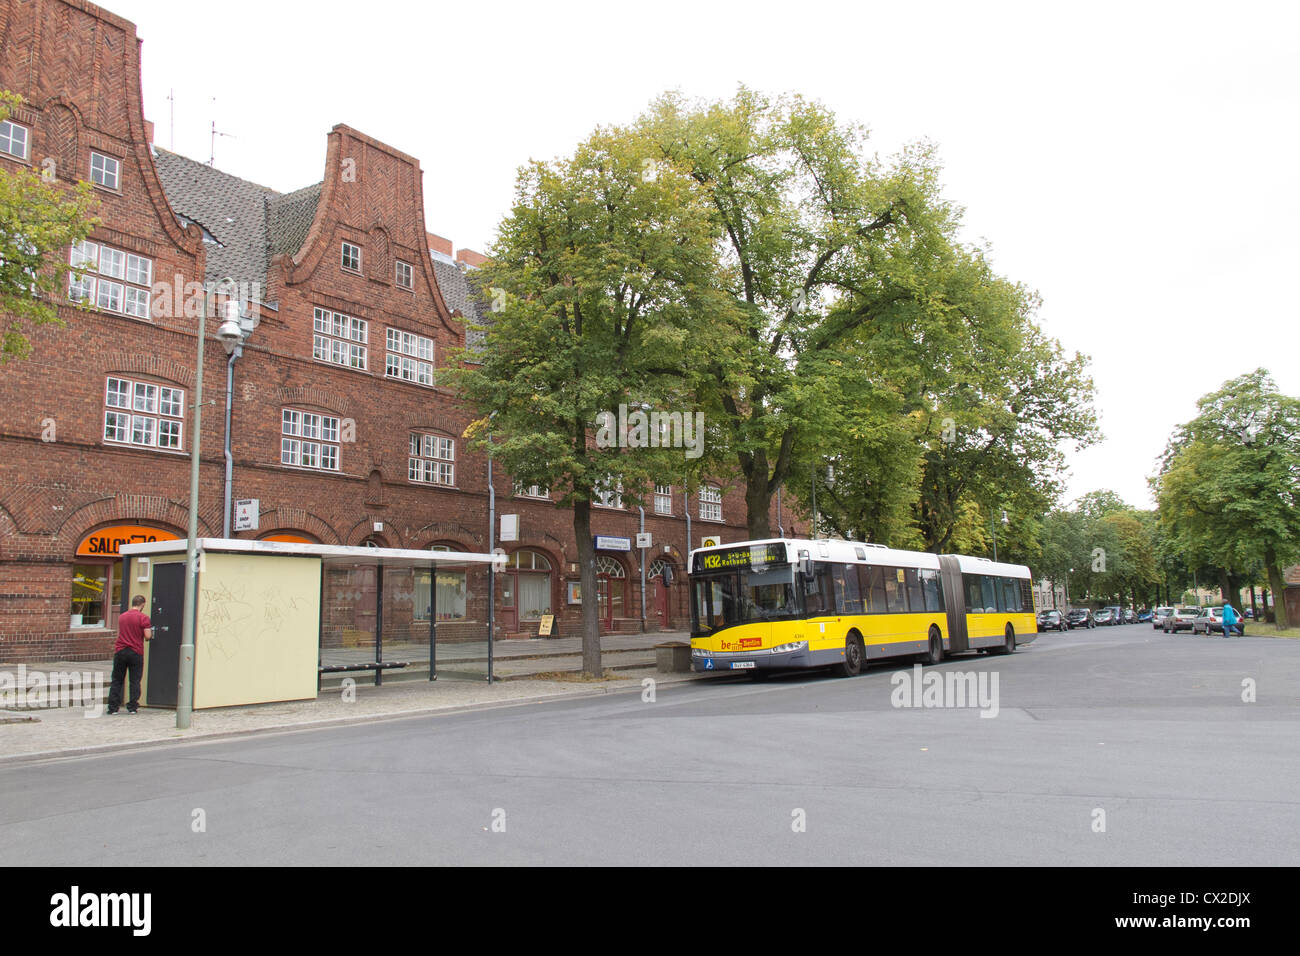 The former Berlin Wall Region at Staaken, West Berlin with a BVG bendy bus at the stop Stock Photo